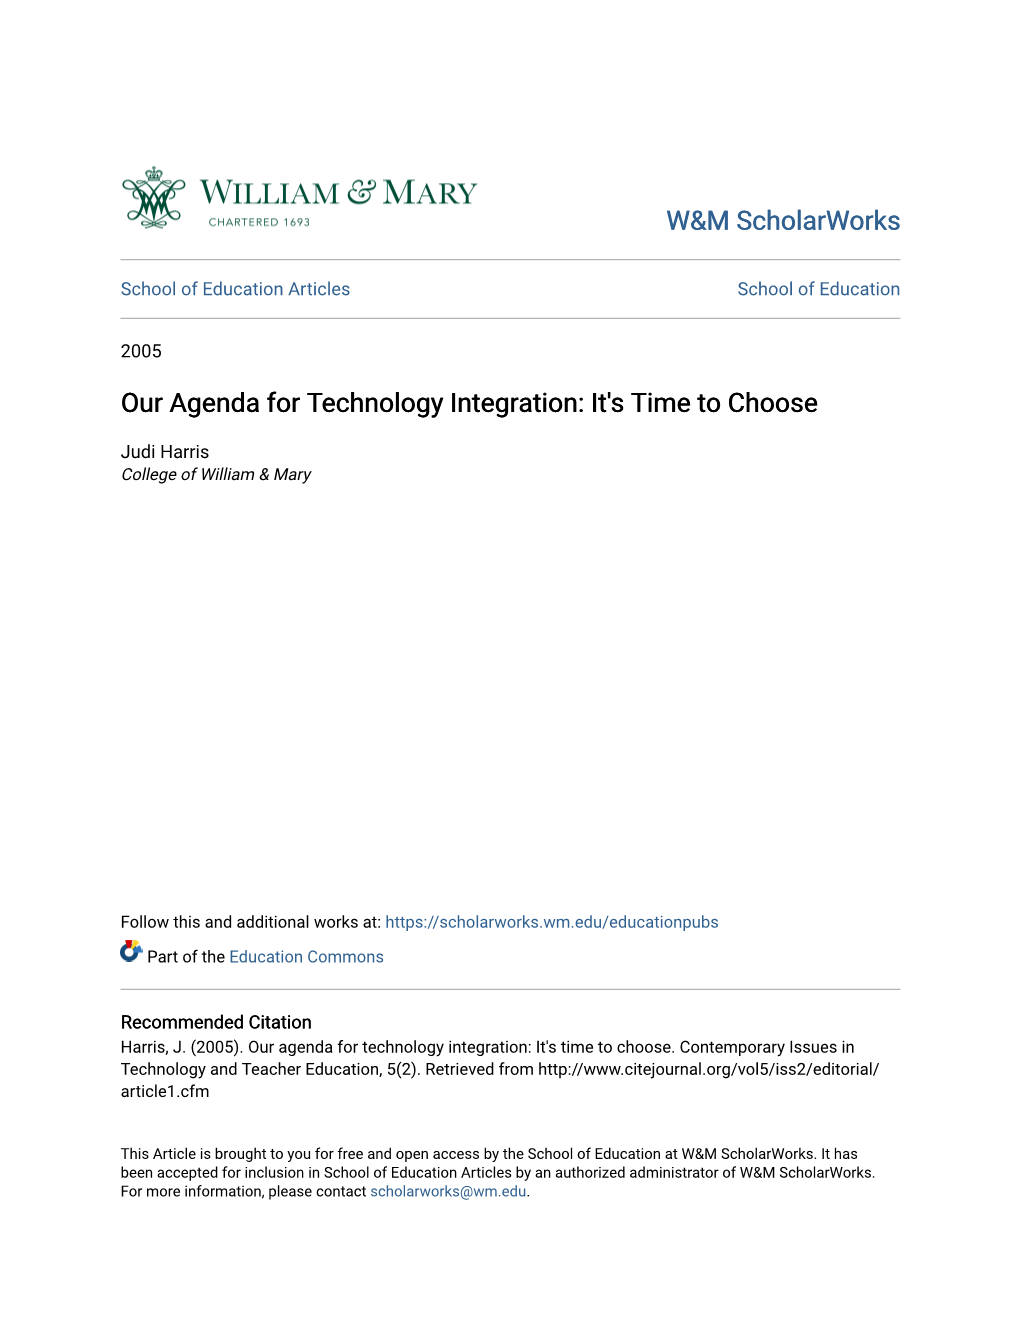 Our Agenda for Technology Integration: It's Time to Choose